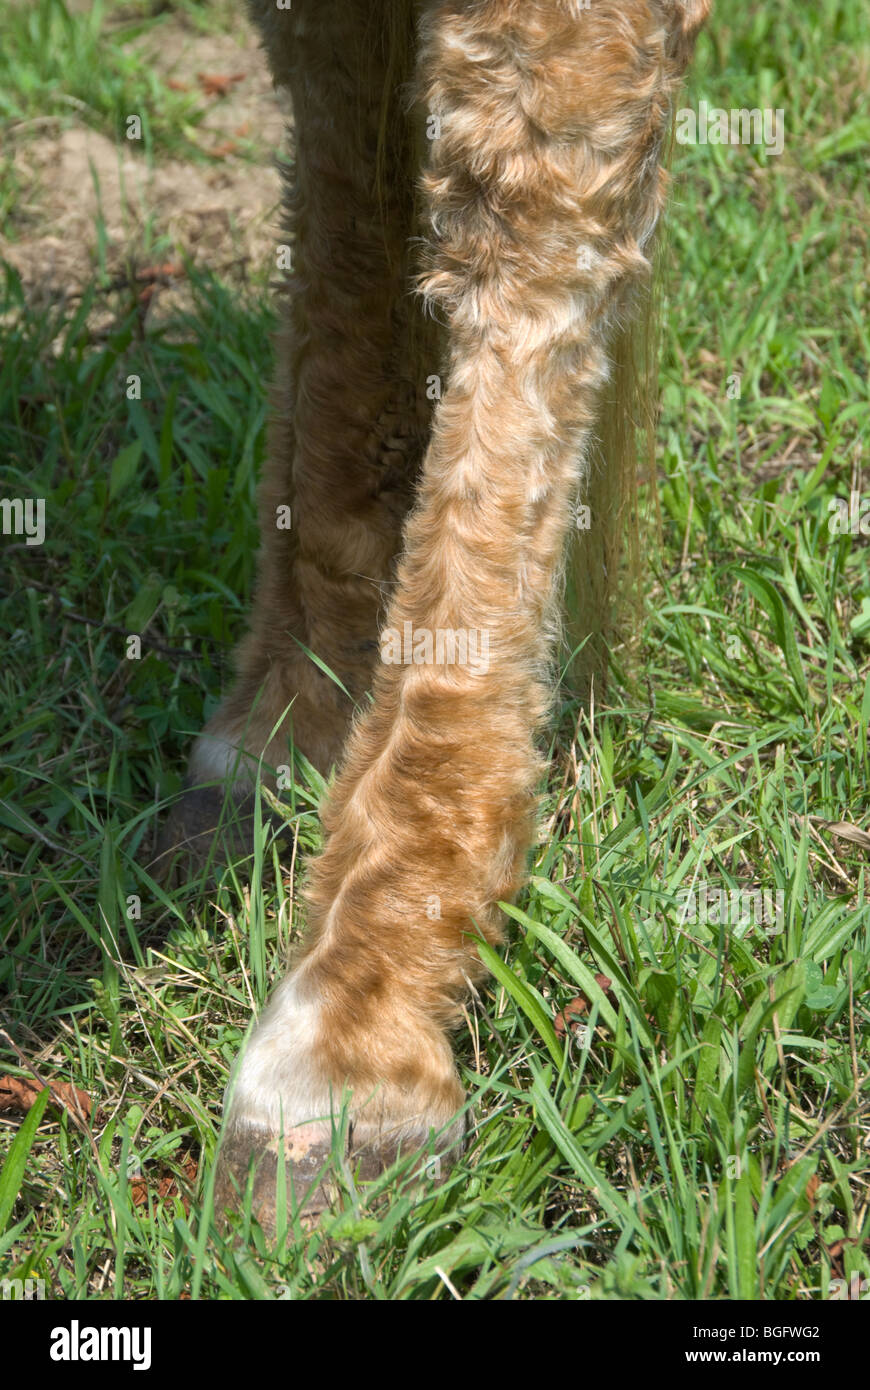 Left hind leg of a Palomino horse with Cushing's Disease and malnutrition, a seriously ill animal. Stock Photo